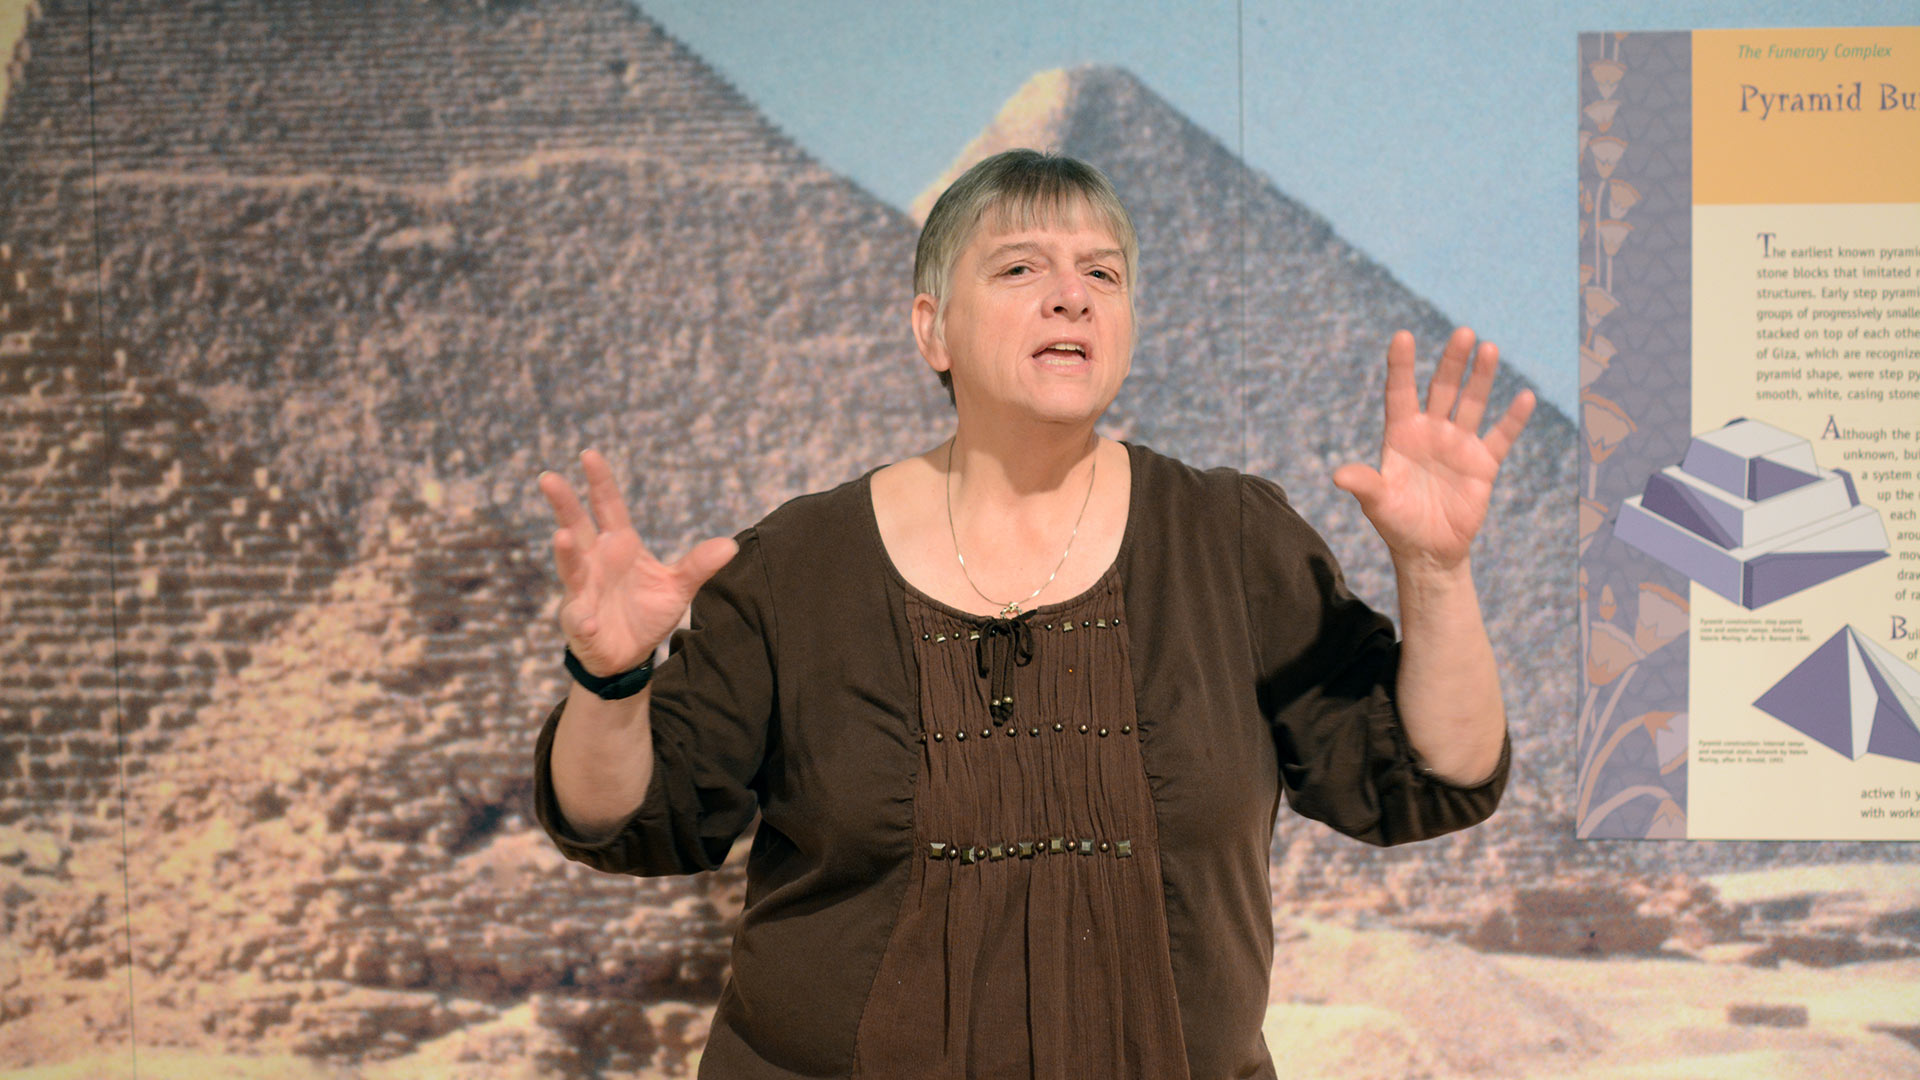 woman gestures while telling stories in front of a pyramid backdrop